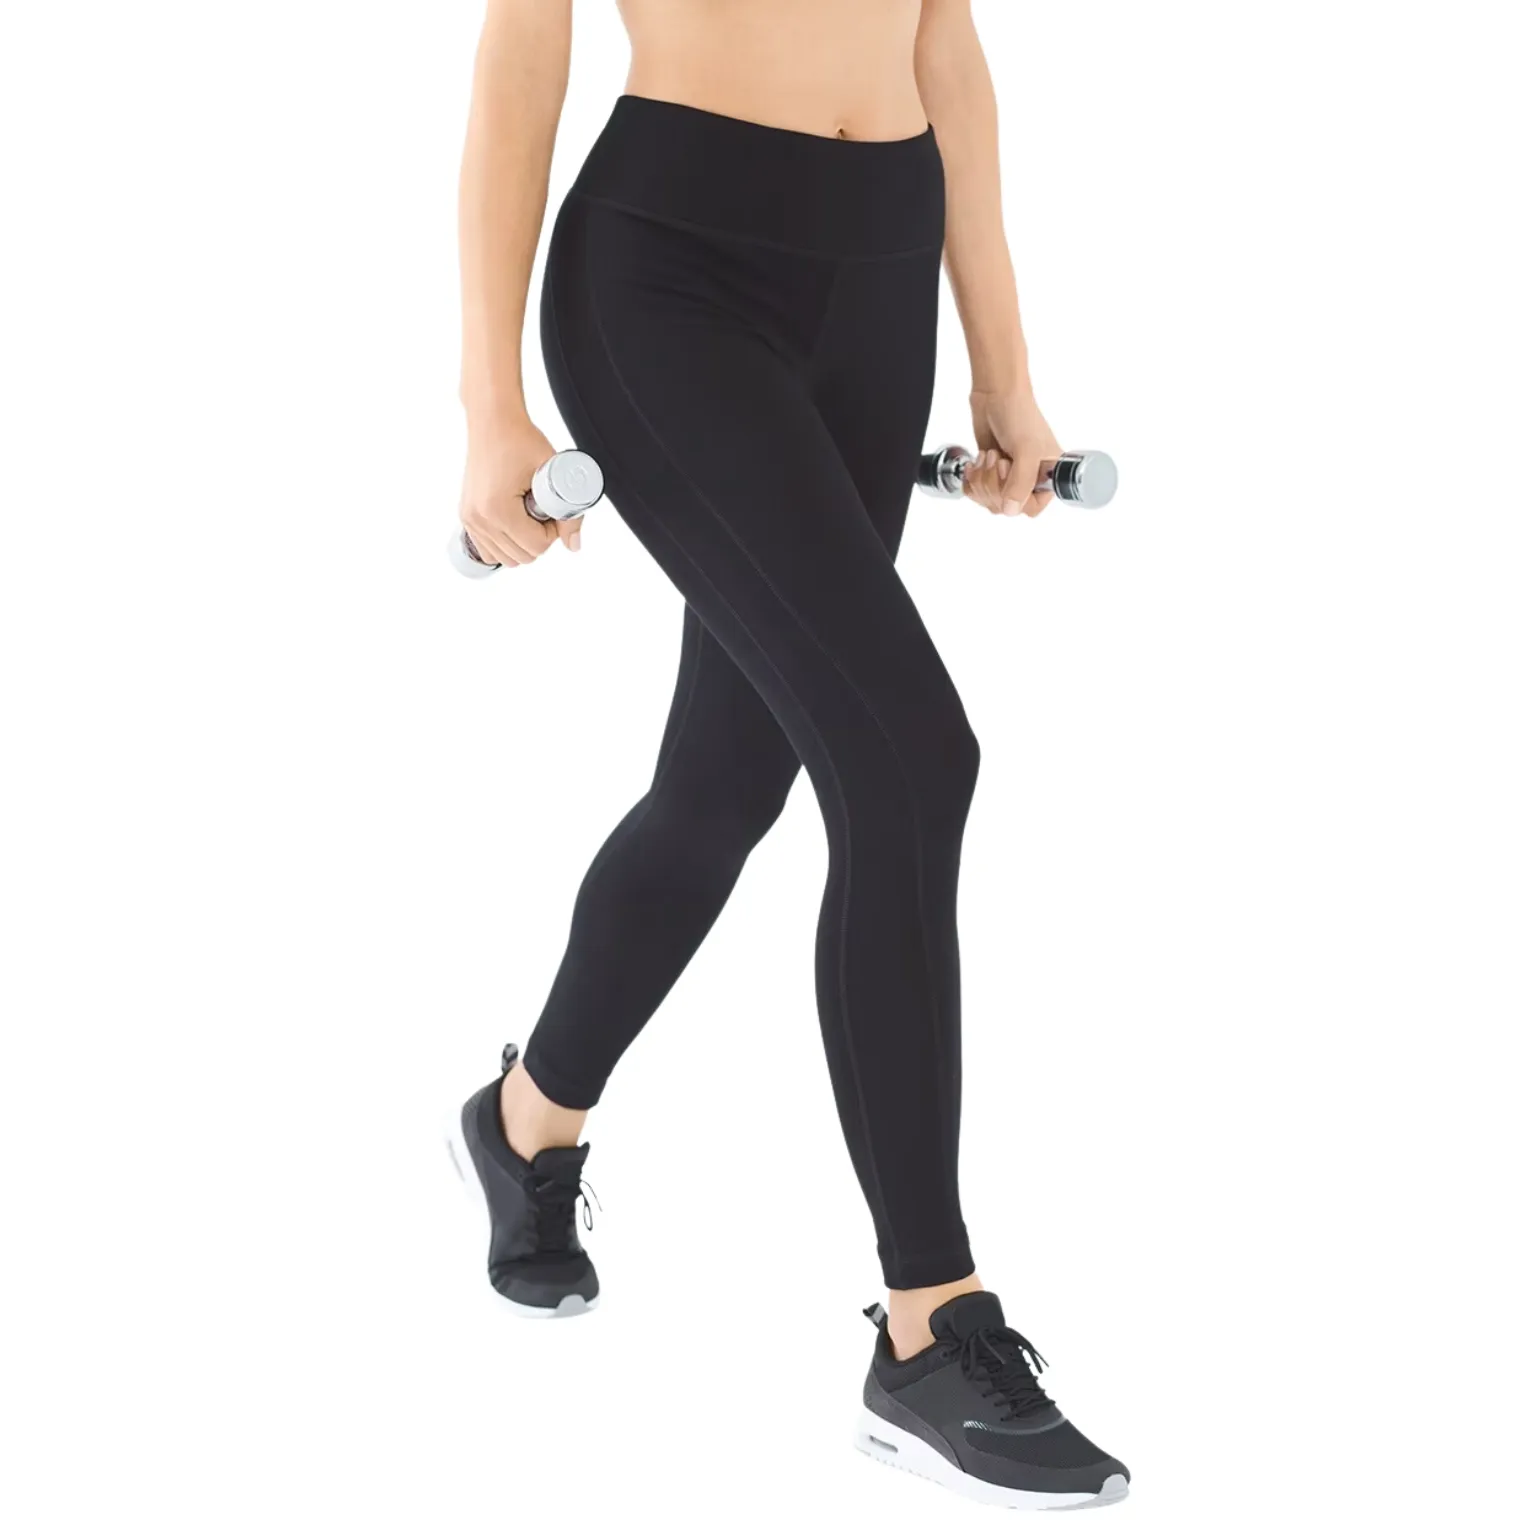 Workout Leggings manufacturing with trendy design